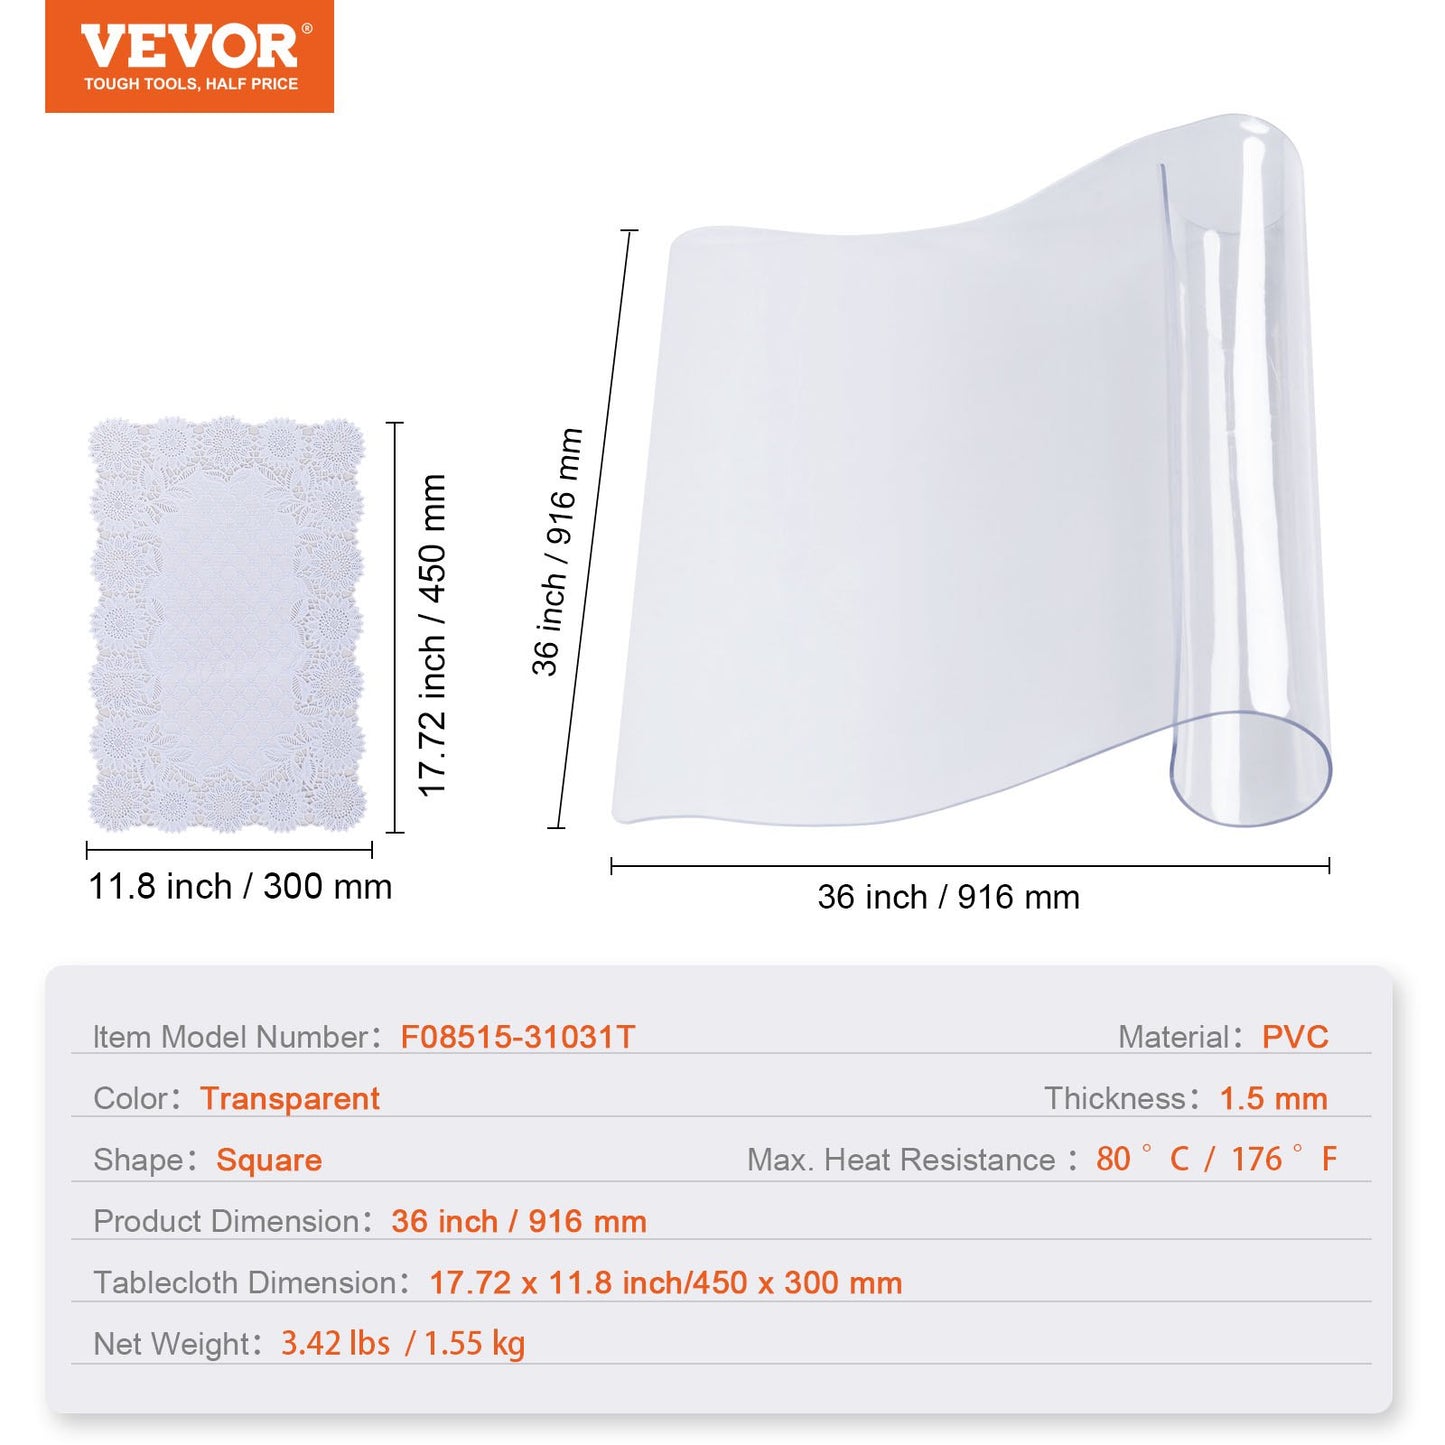 Clear Table Cover Protector, 36"x36"/916 x 916 mm Table Cover, 1.5 mm Thick PVC Plastic Tablecloth, Waterproof Desktop Protector for Writing Desk, Coffee Table, Dining Room Table